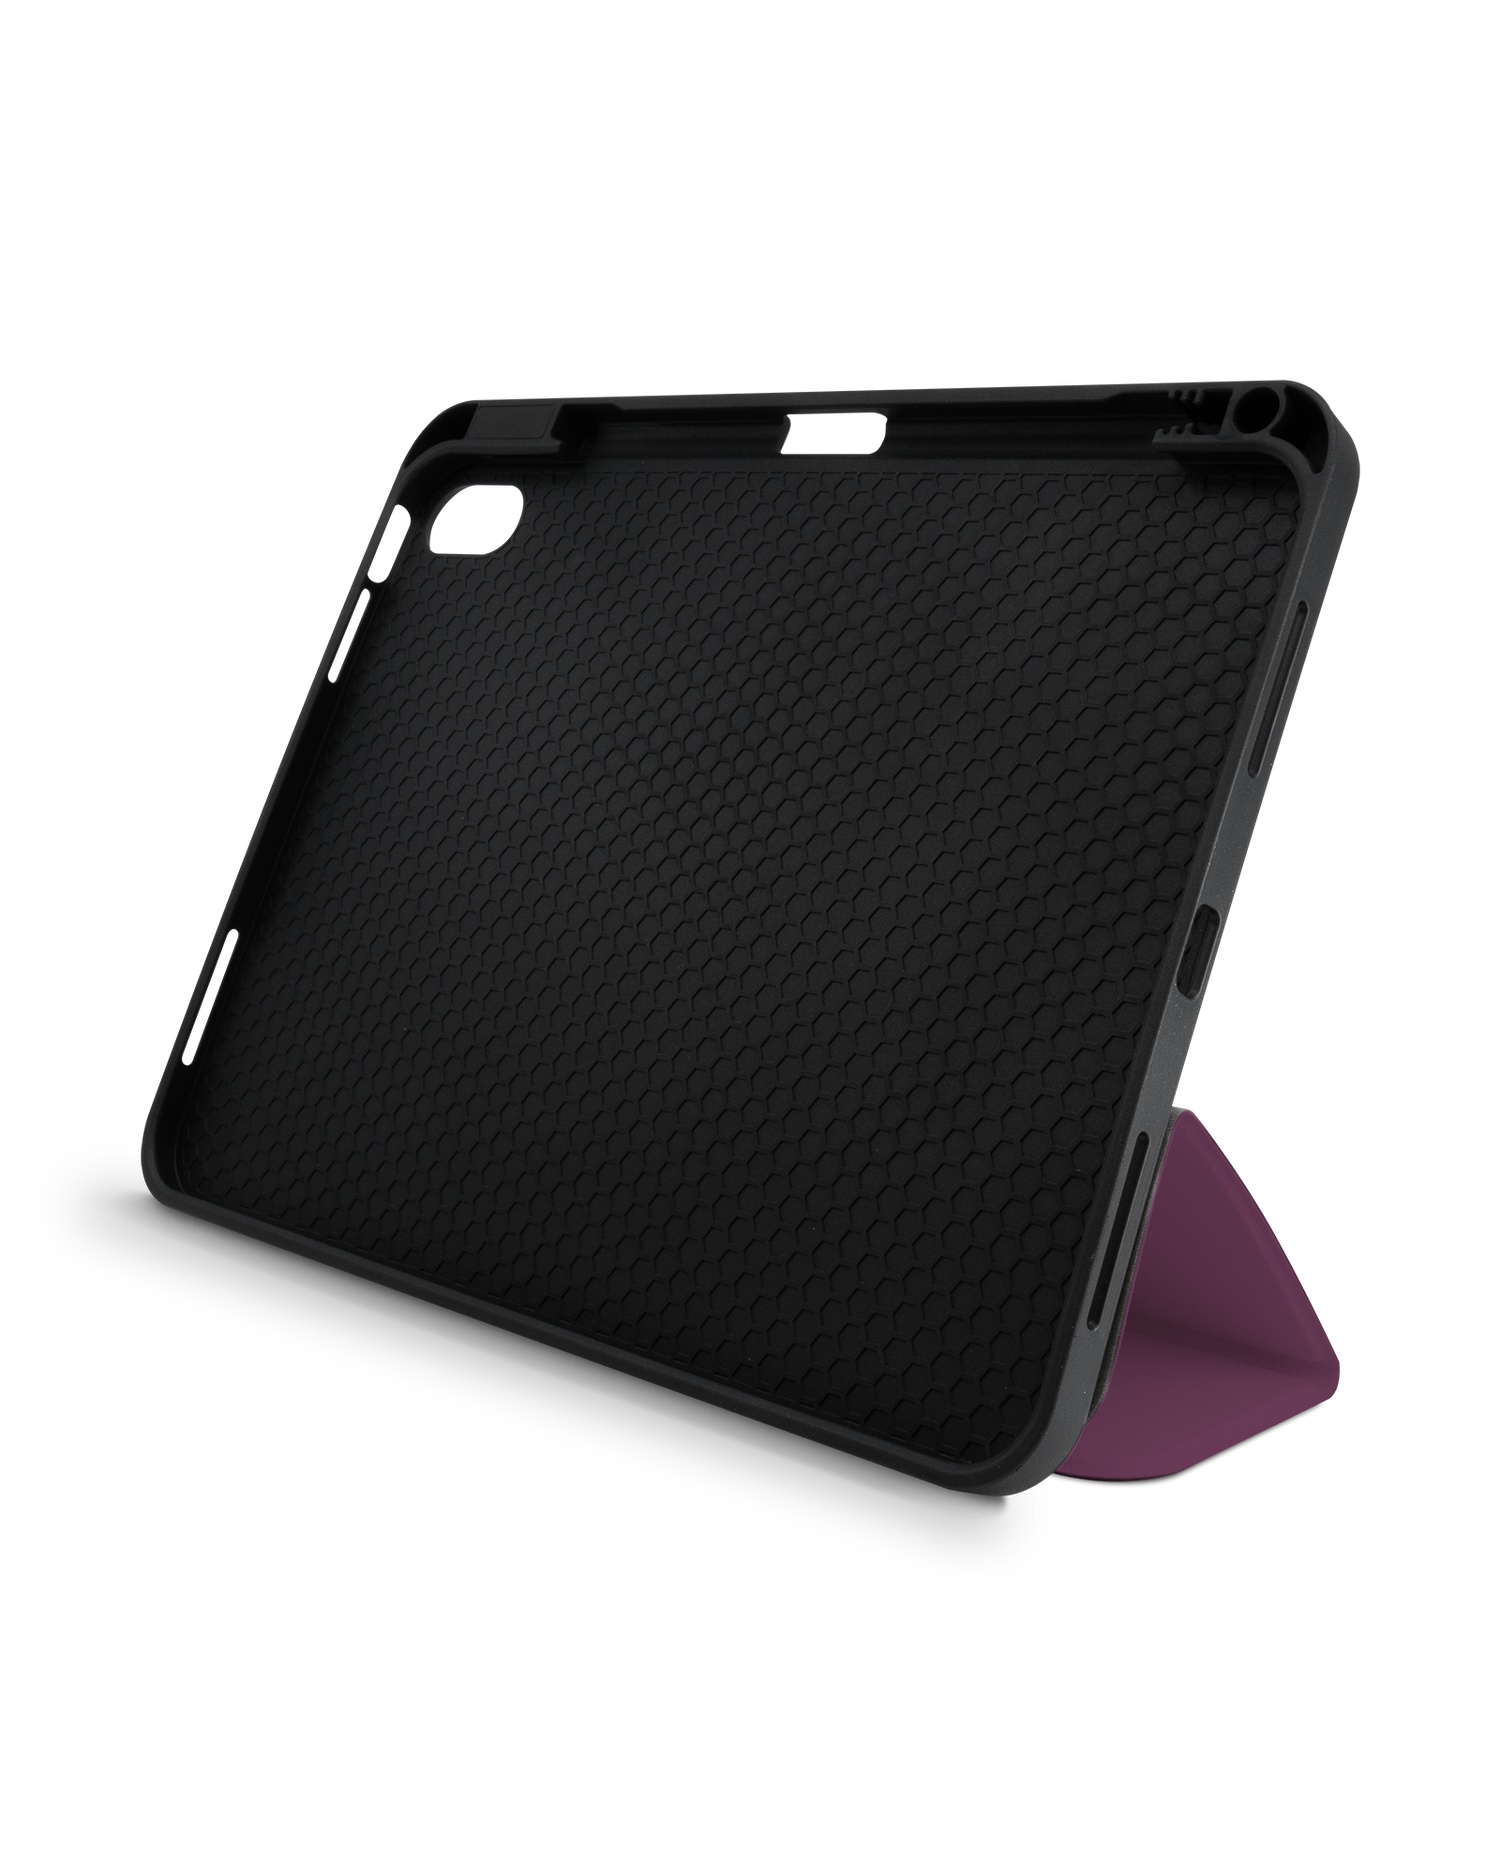 PLUM iPad Case with Pencil Holder for Apple iPad (10th Generation): Set up in landscape format (front view)